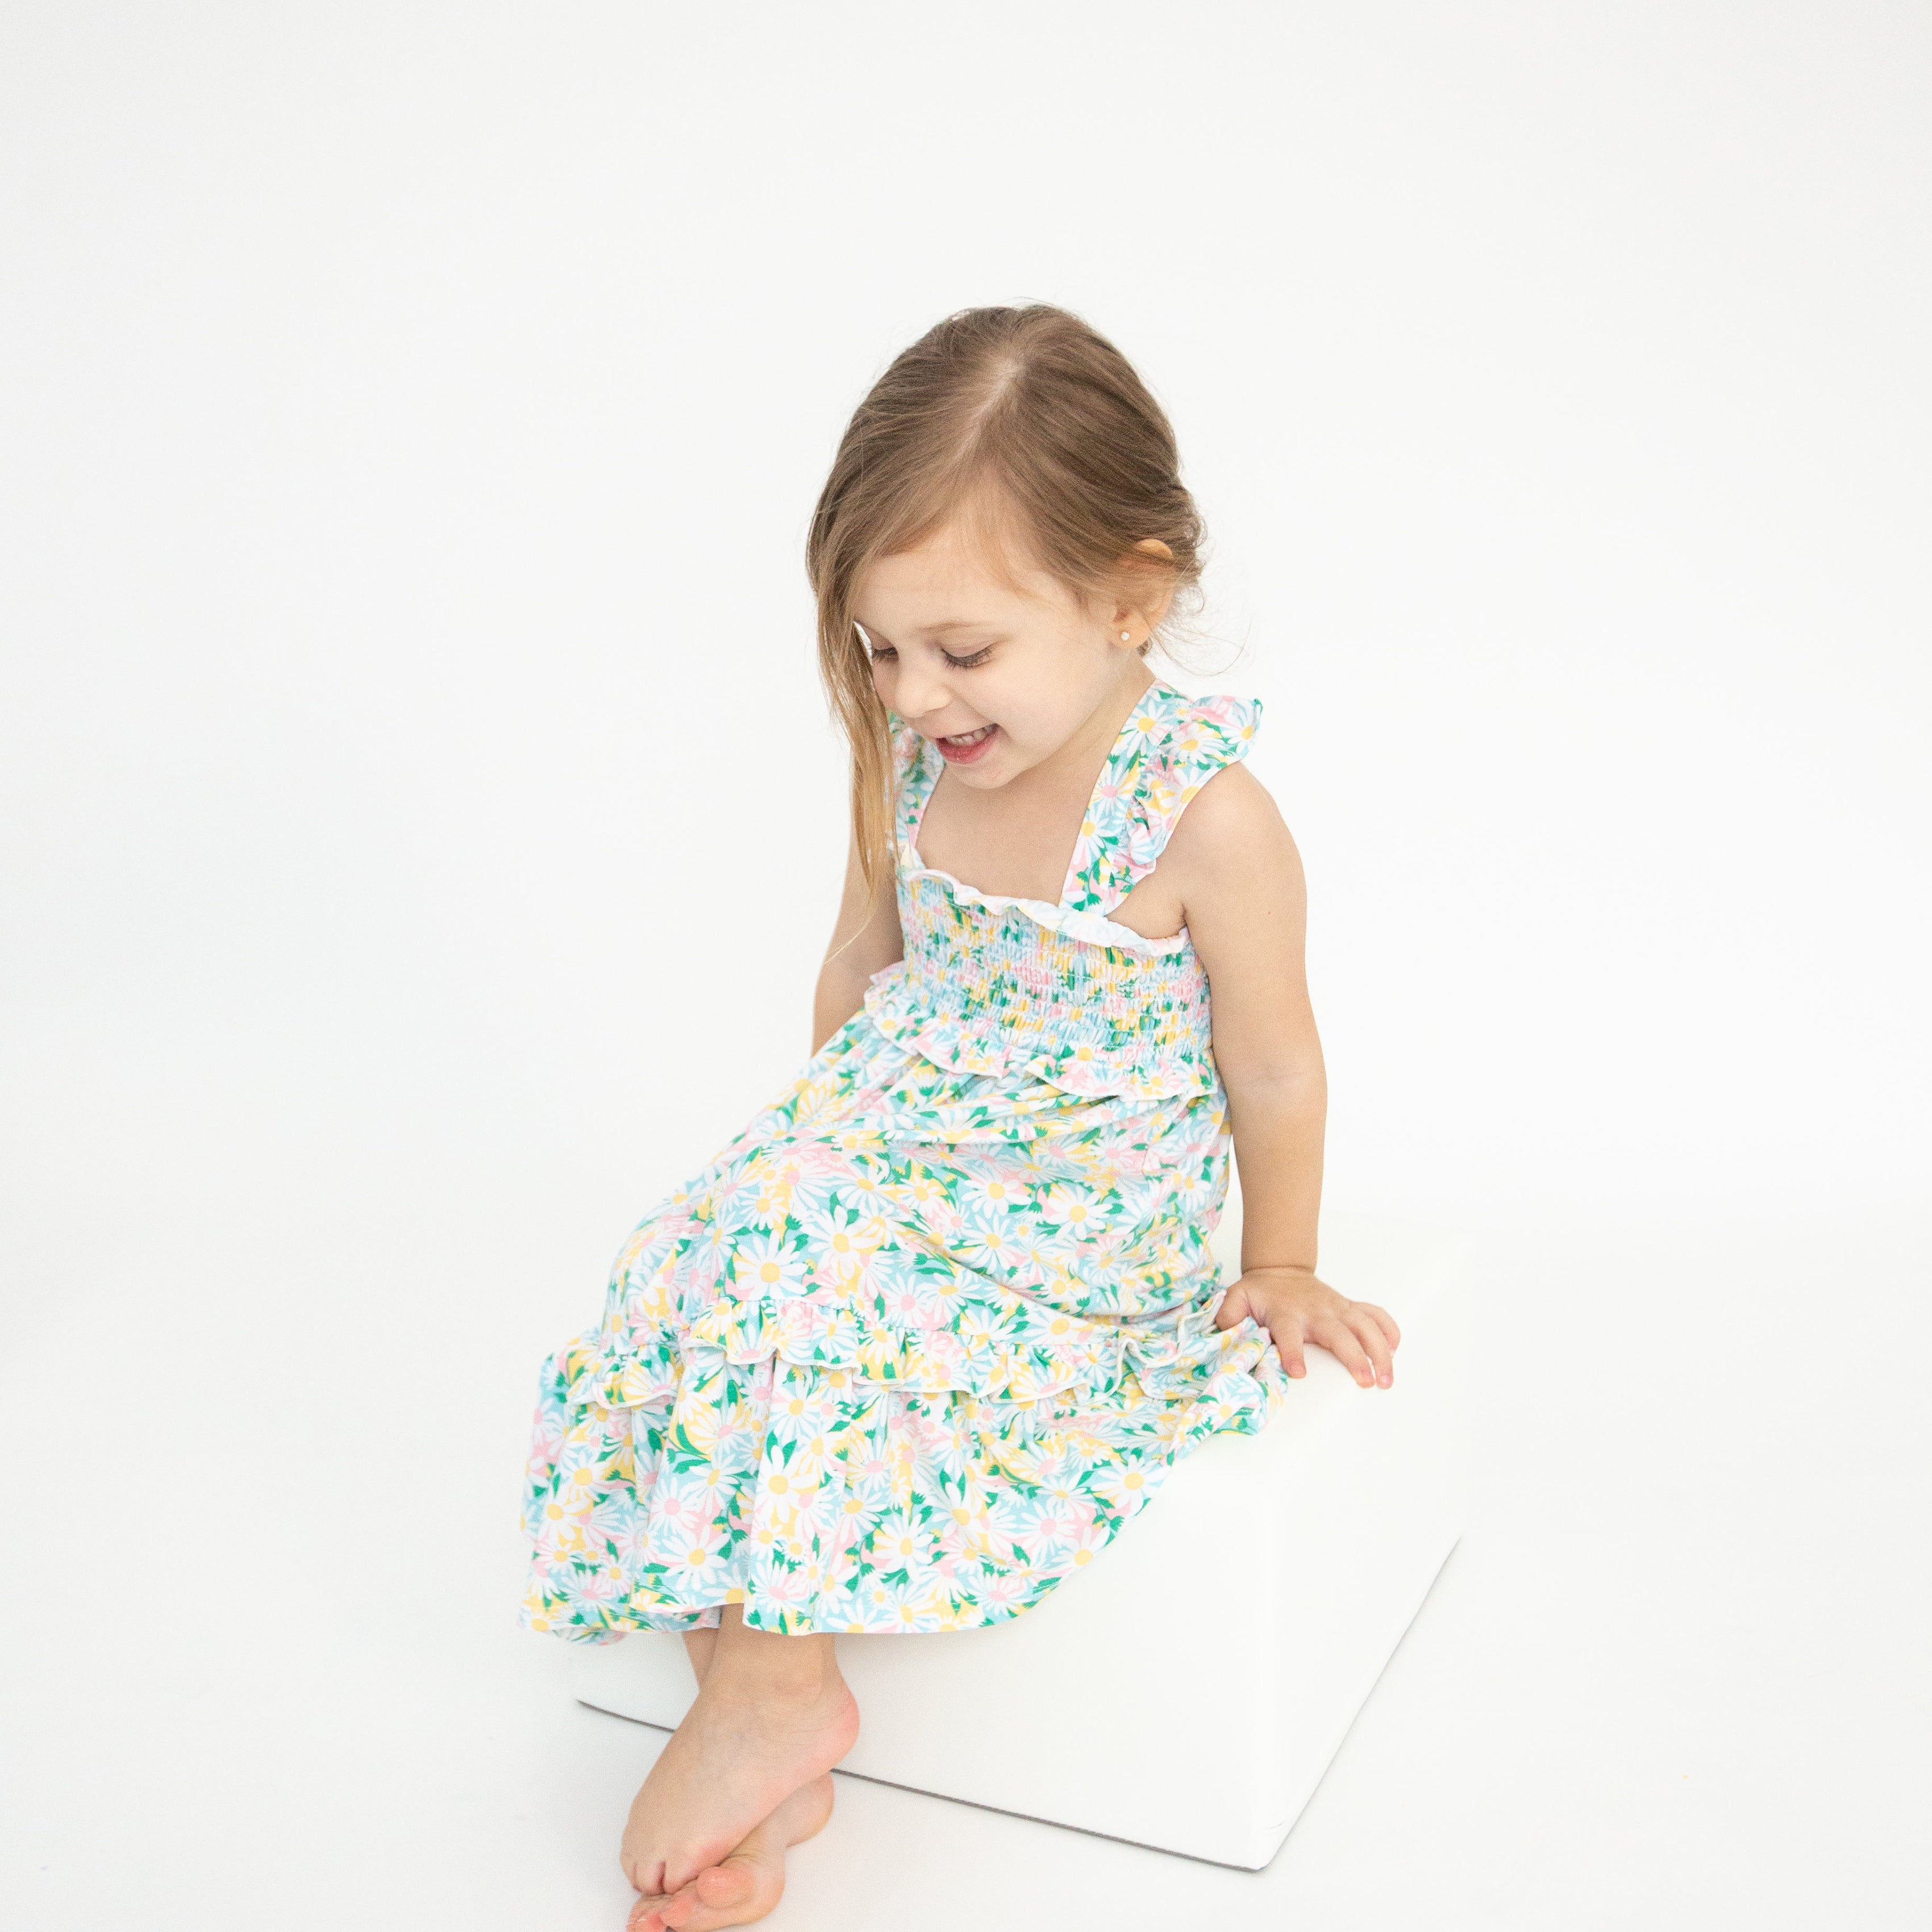 Smocked Ruffle Tiered Sundress - Color Fill Daisies